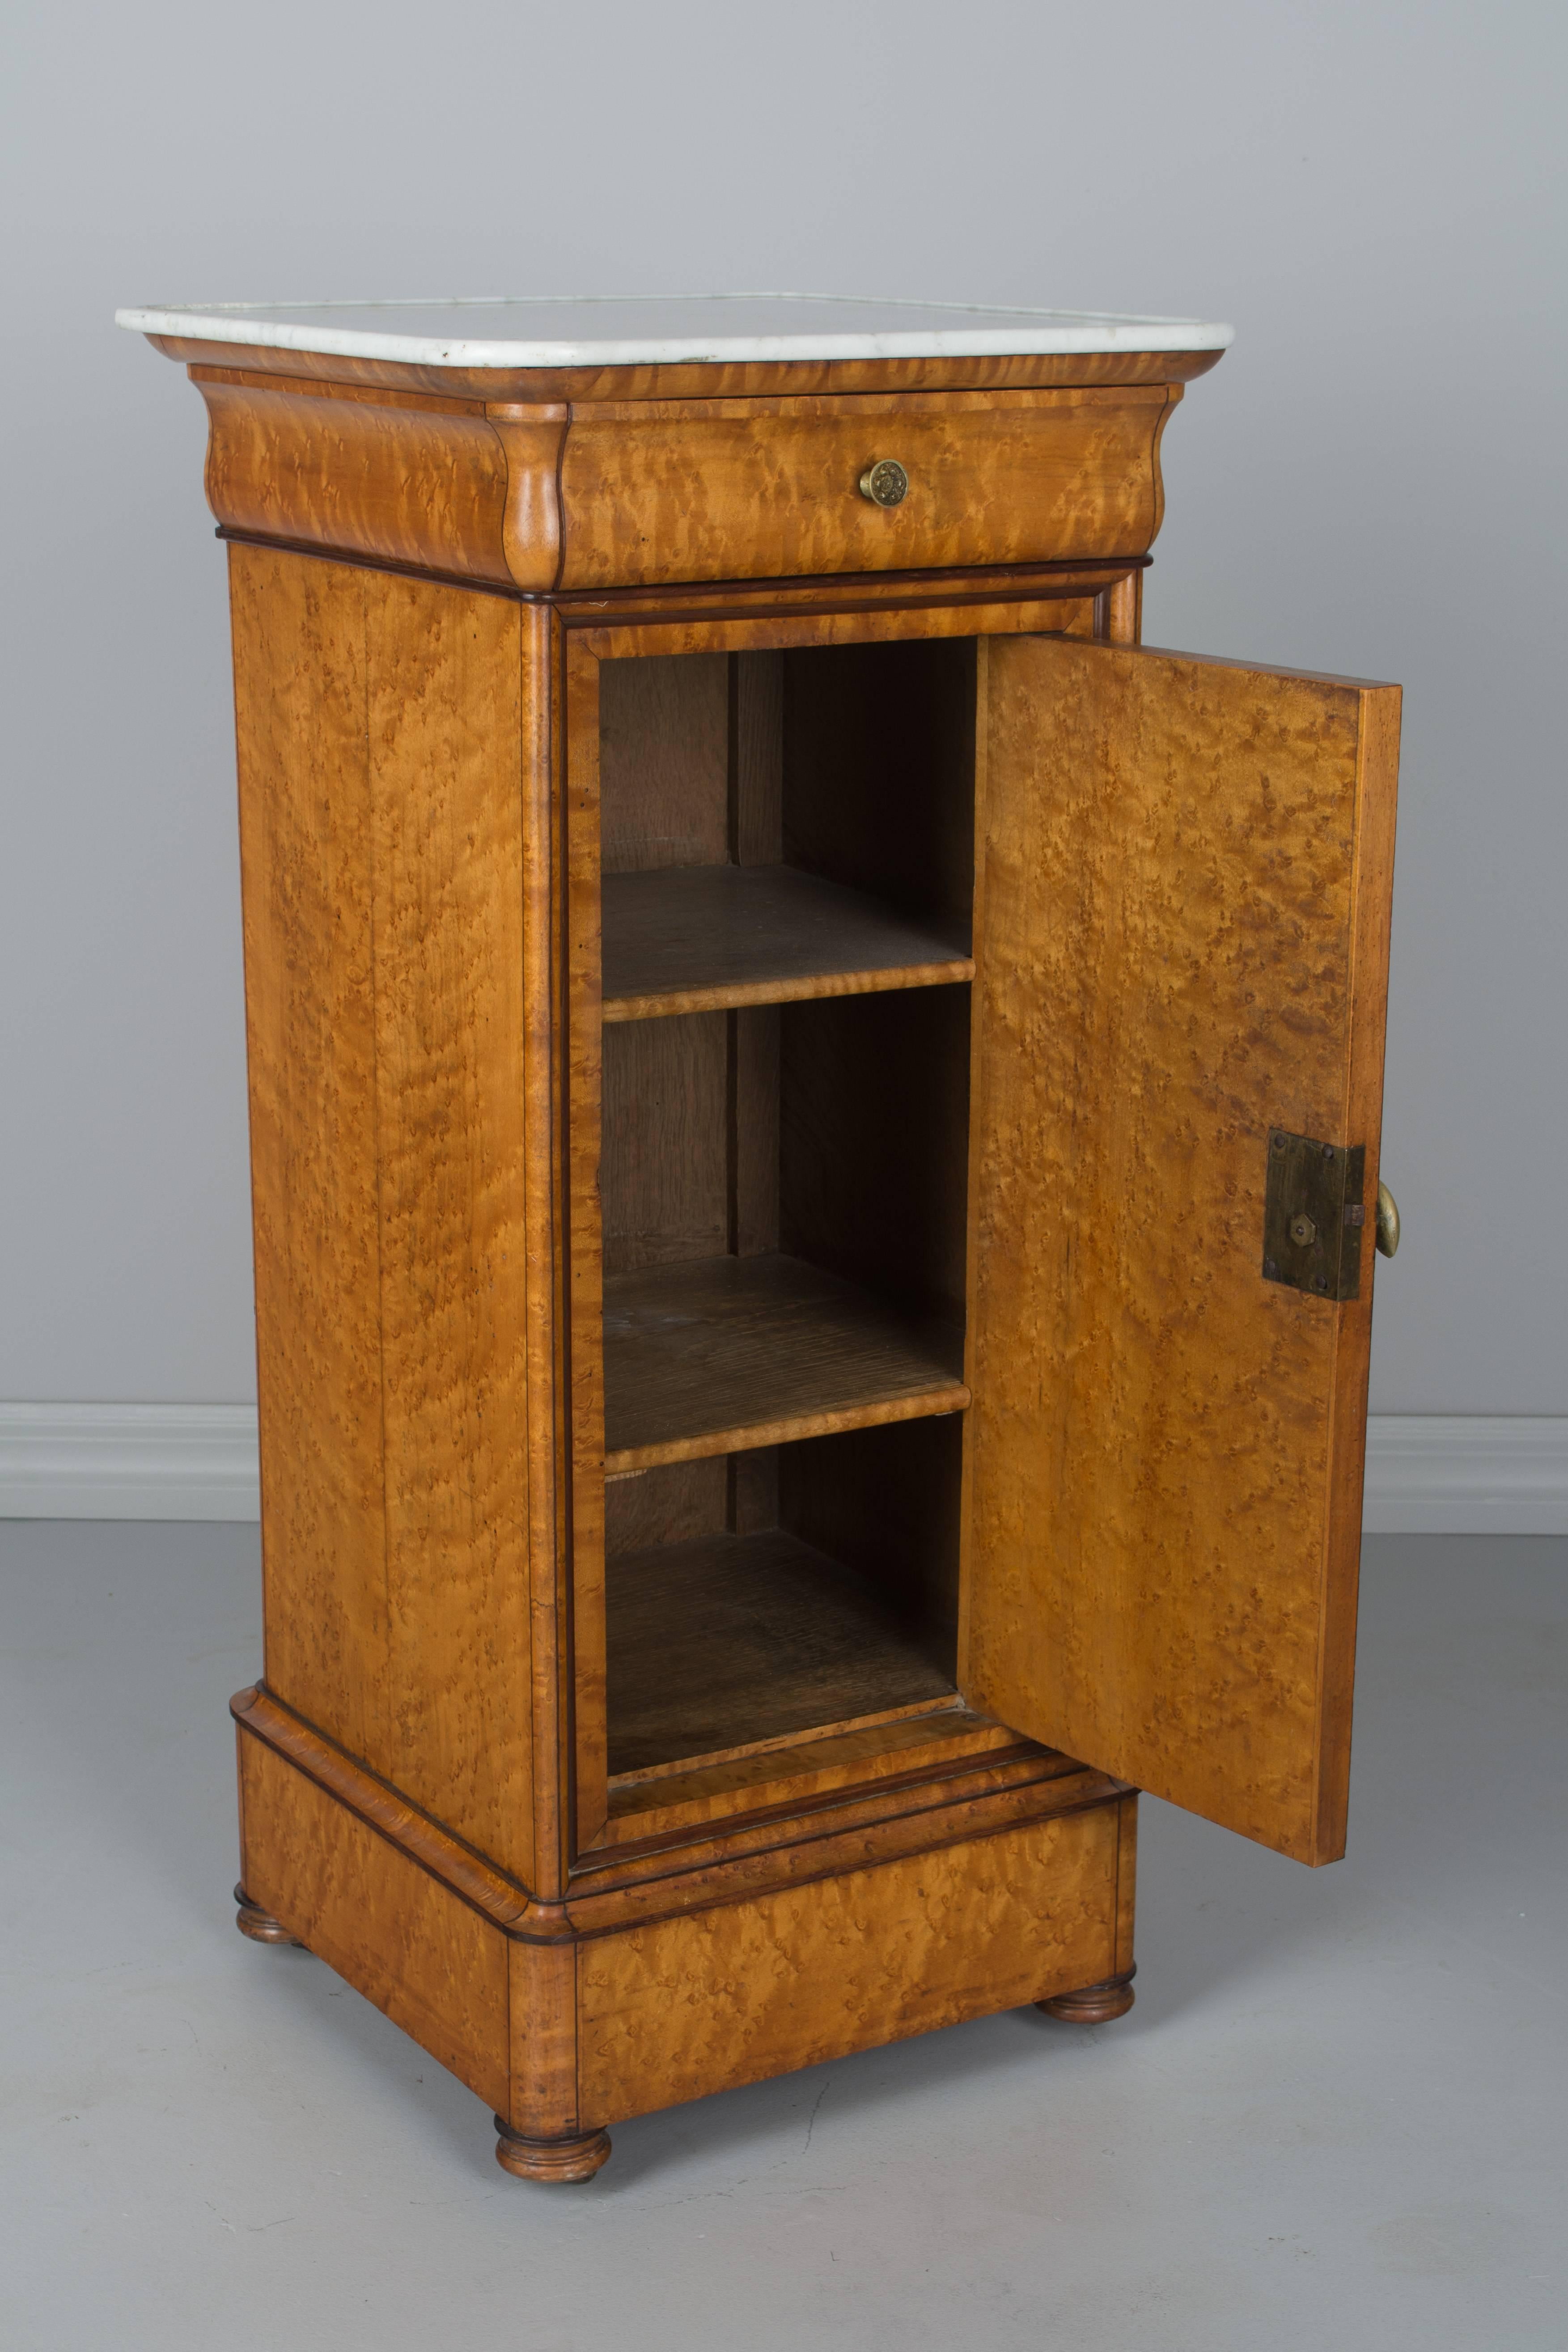 19th century French Charles X-side table or nightstand, made of veneer of bird's-eye maple over solid oak with mahogany trim. Single dovetailed drawer and cabinet door opening to an interior with two shelves. Turned wood feet with brass castors.